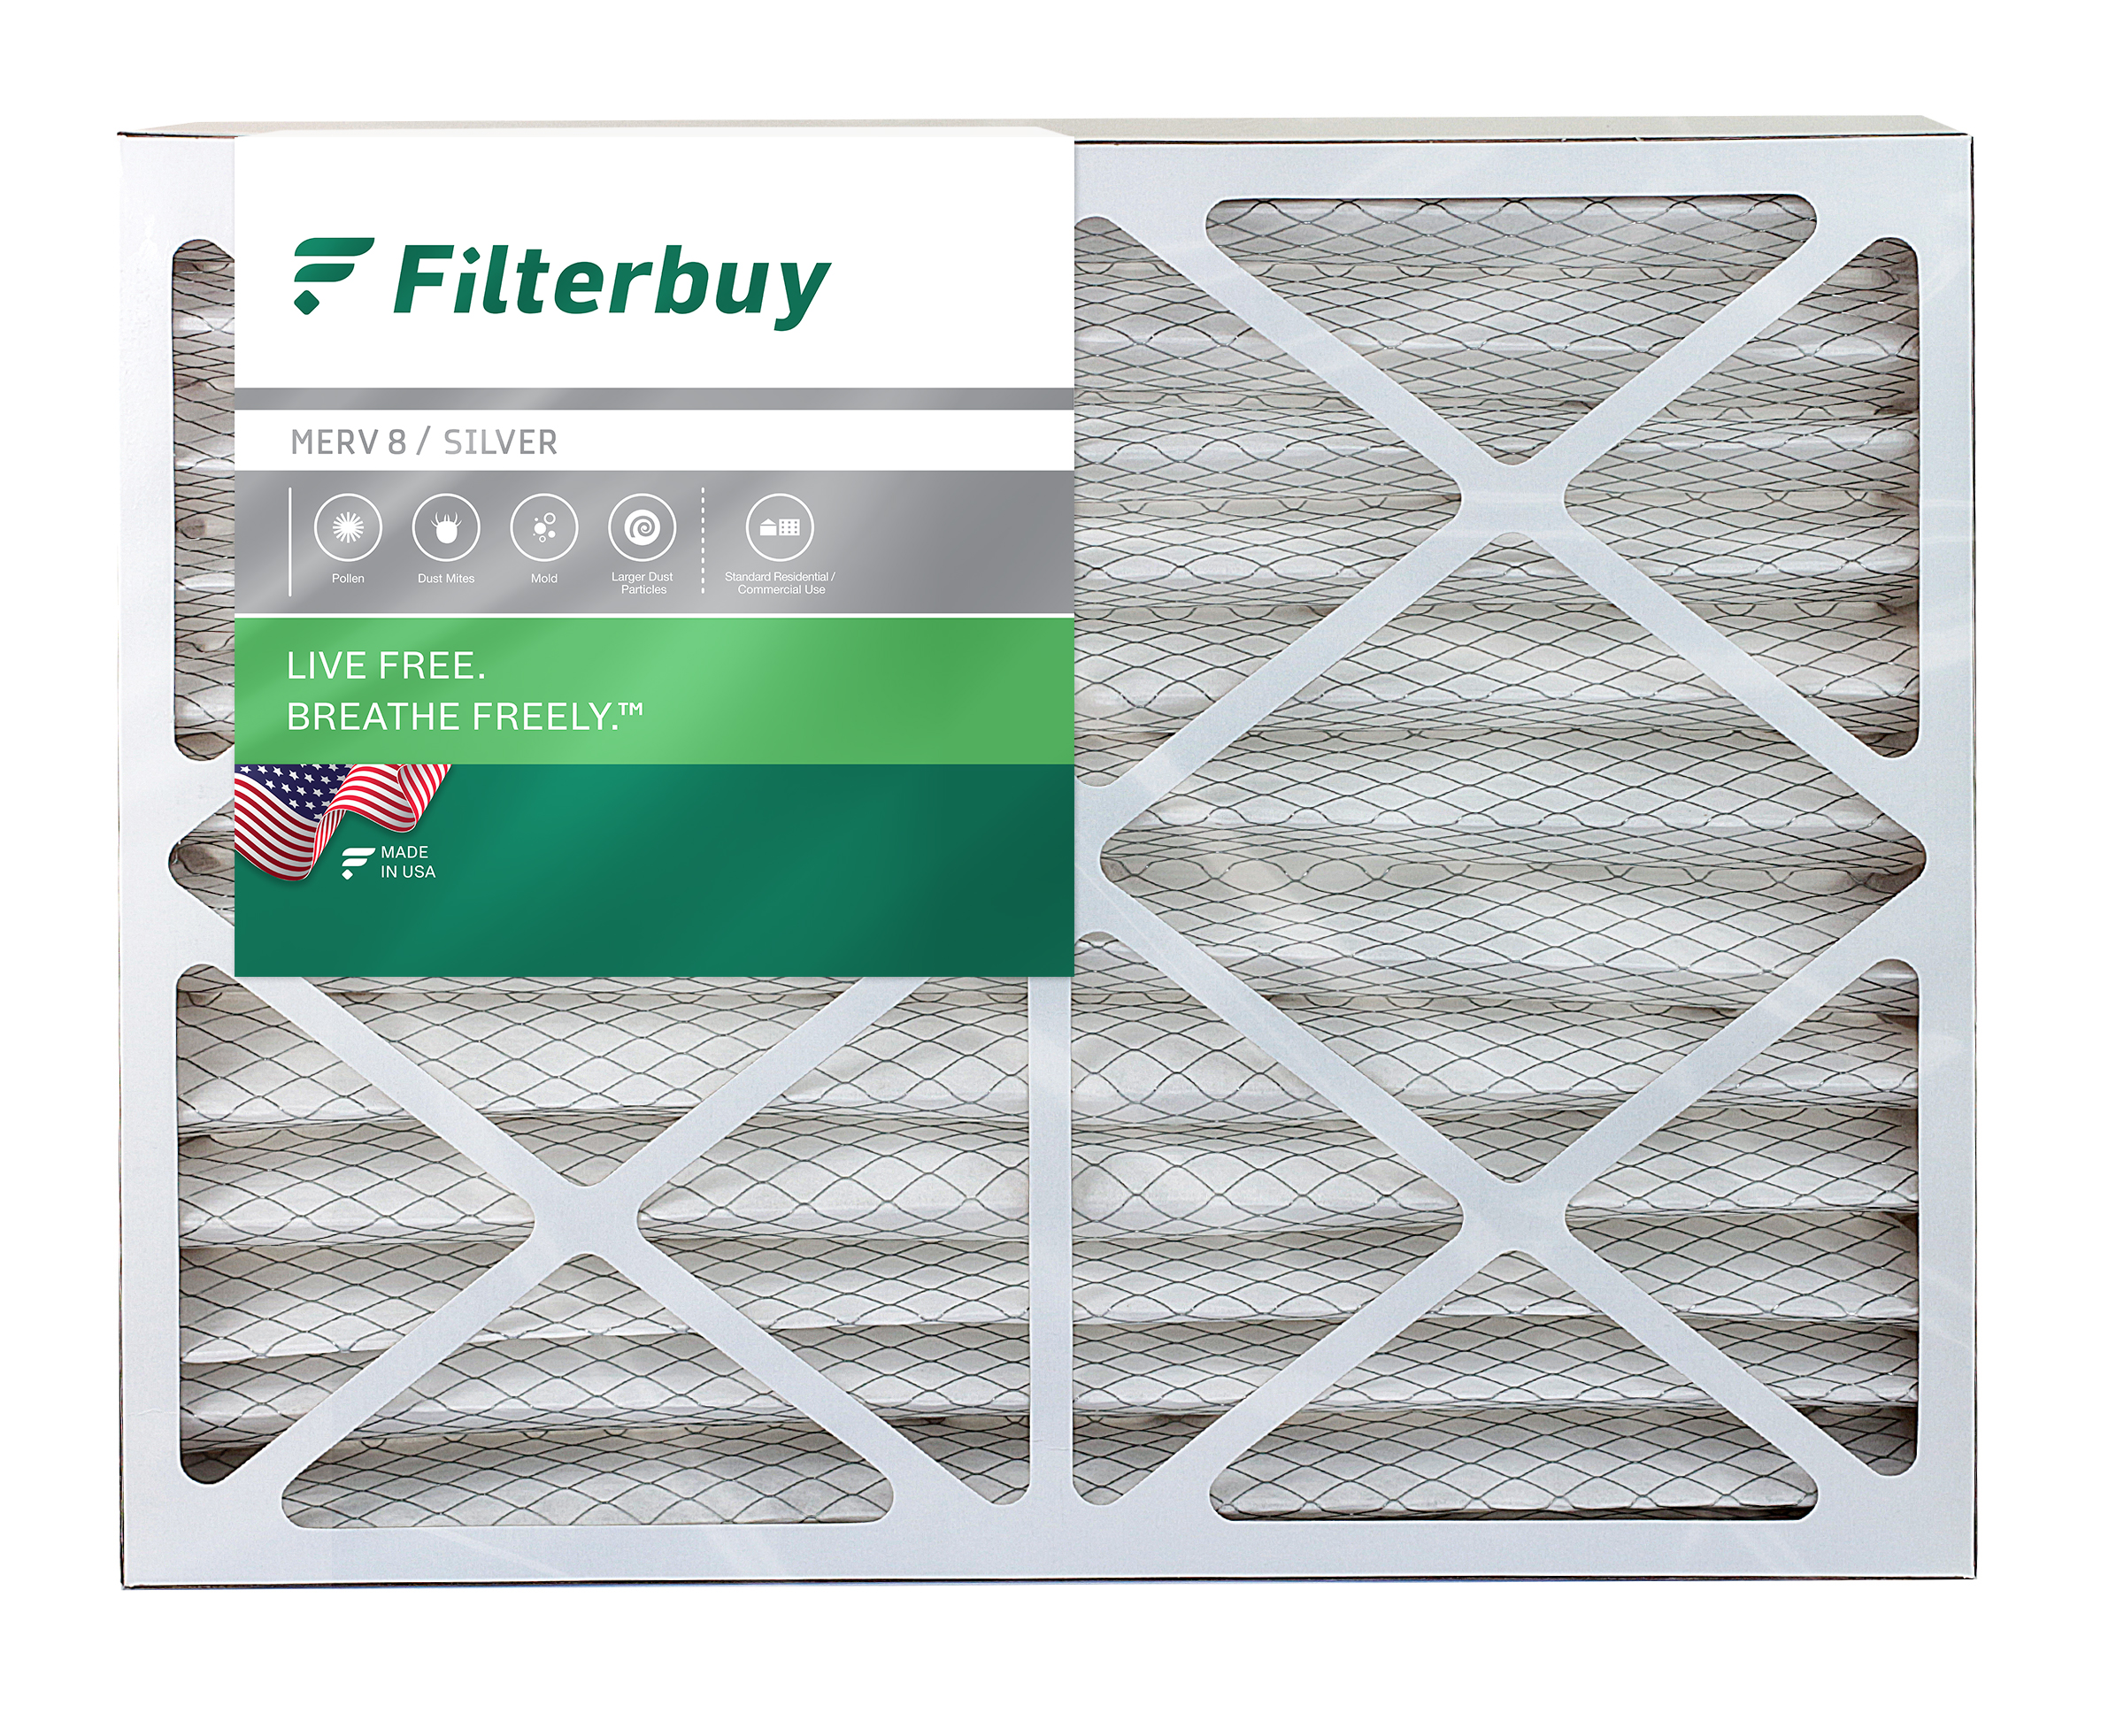 FilterBuy 18x25x4 MERV 8 Pleated AC Furnace Air Filter, Pack of 4 Filters 18x25x4 Silver